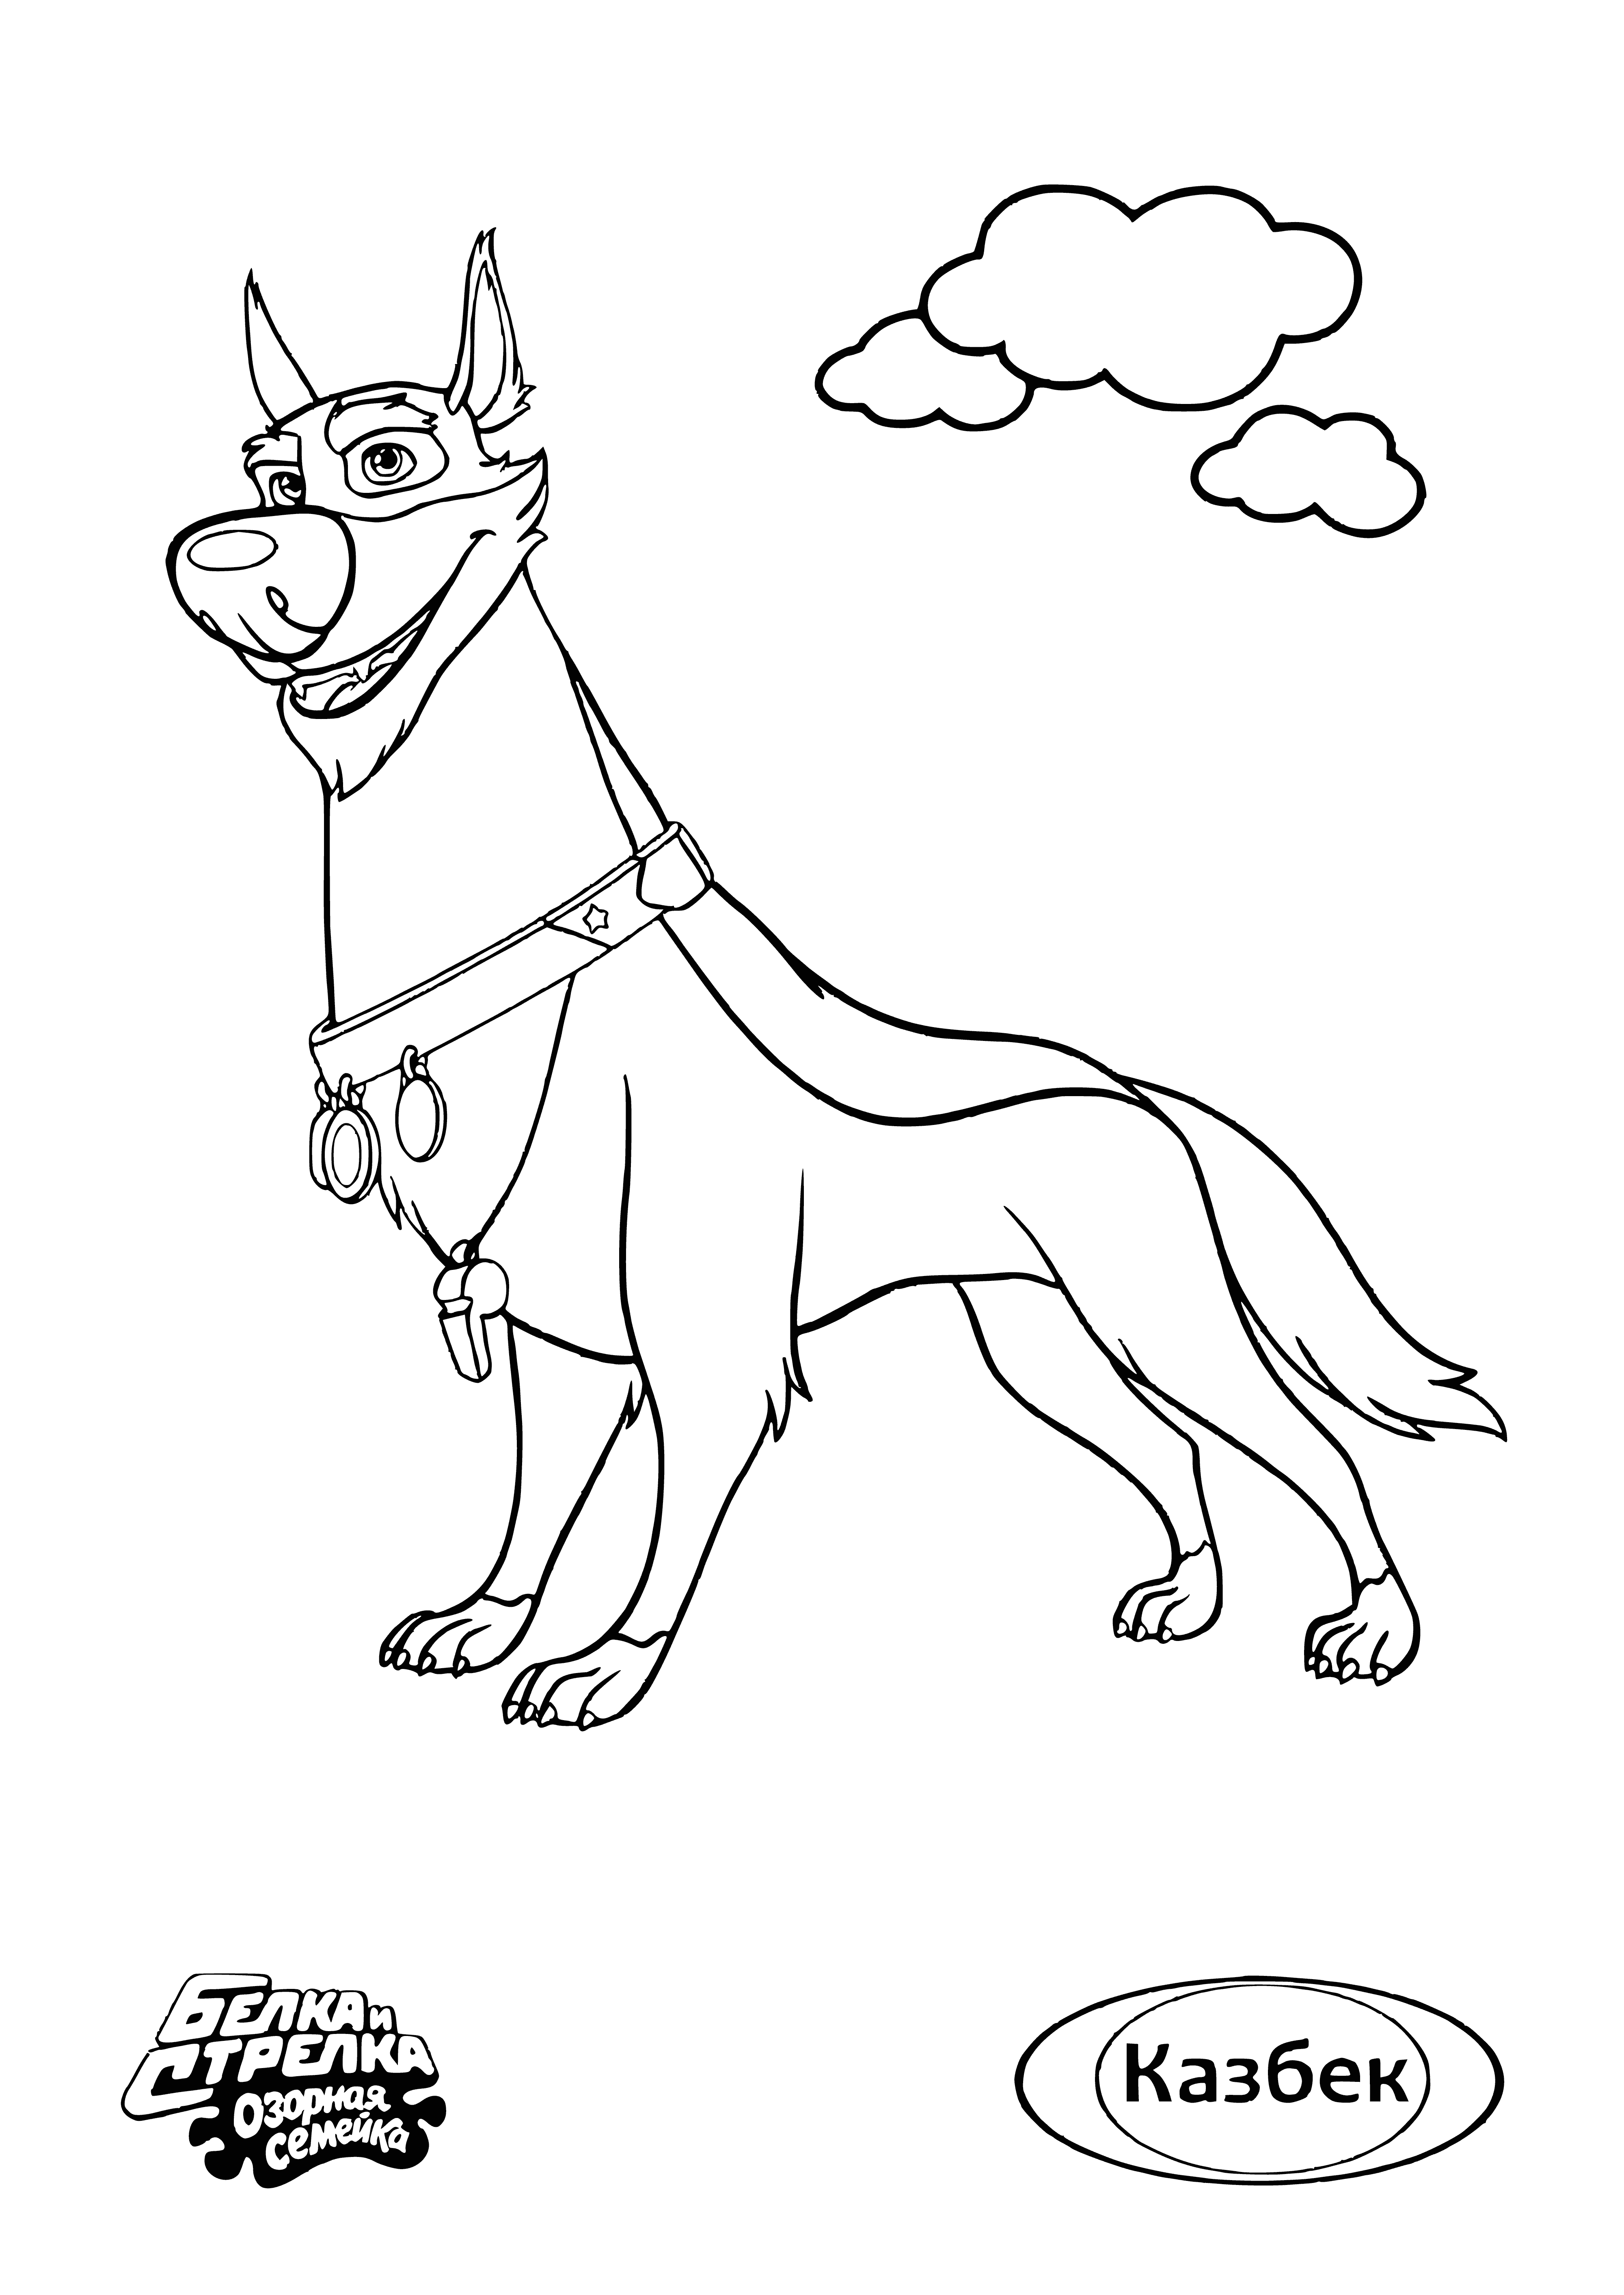 coloring page: Belka & Strelka are two mischievous, begging pups with a large dog behind them maybe their owner/caretaker.